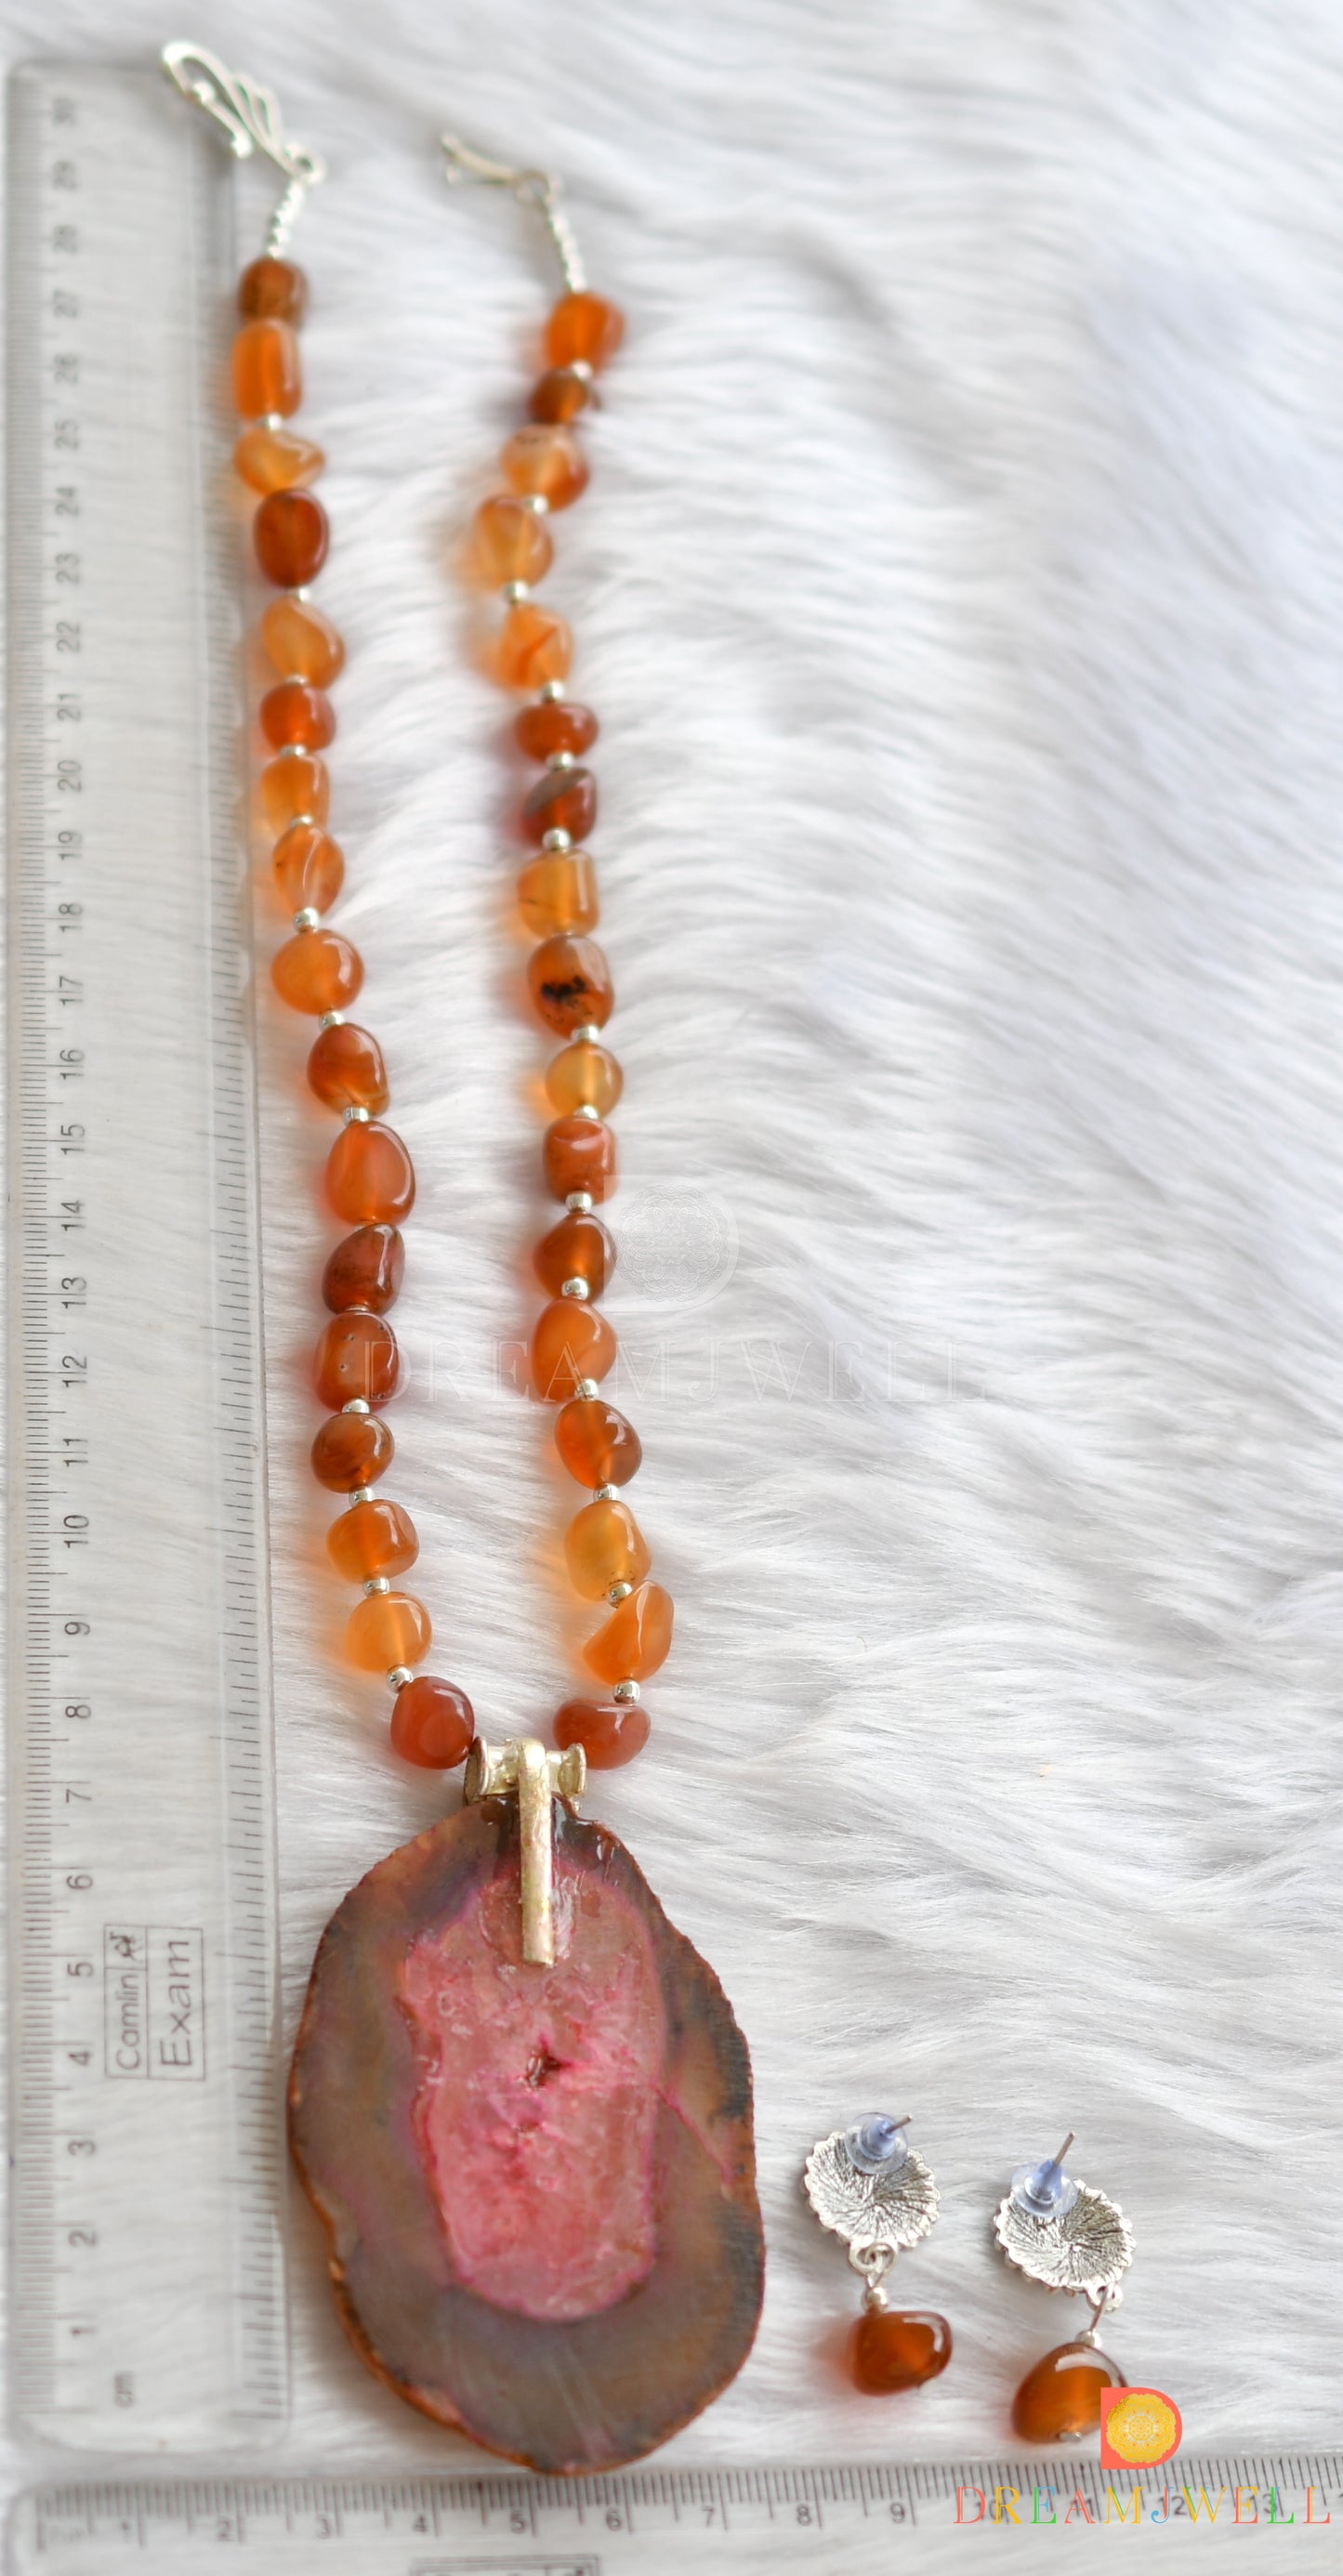 Silver tone sliced agate pendant with brown onyx beads necklace set dj-38015